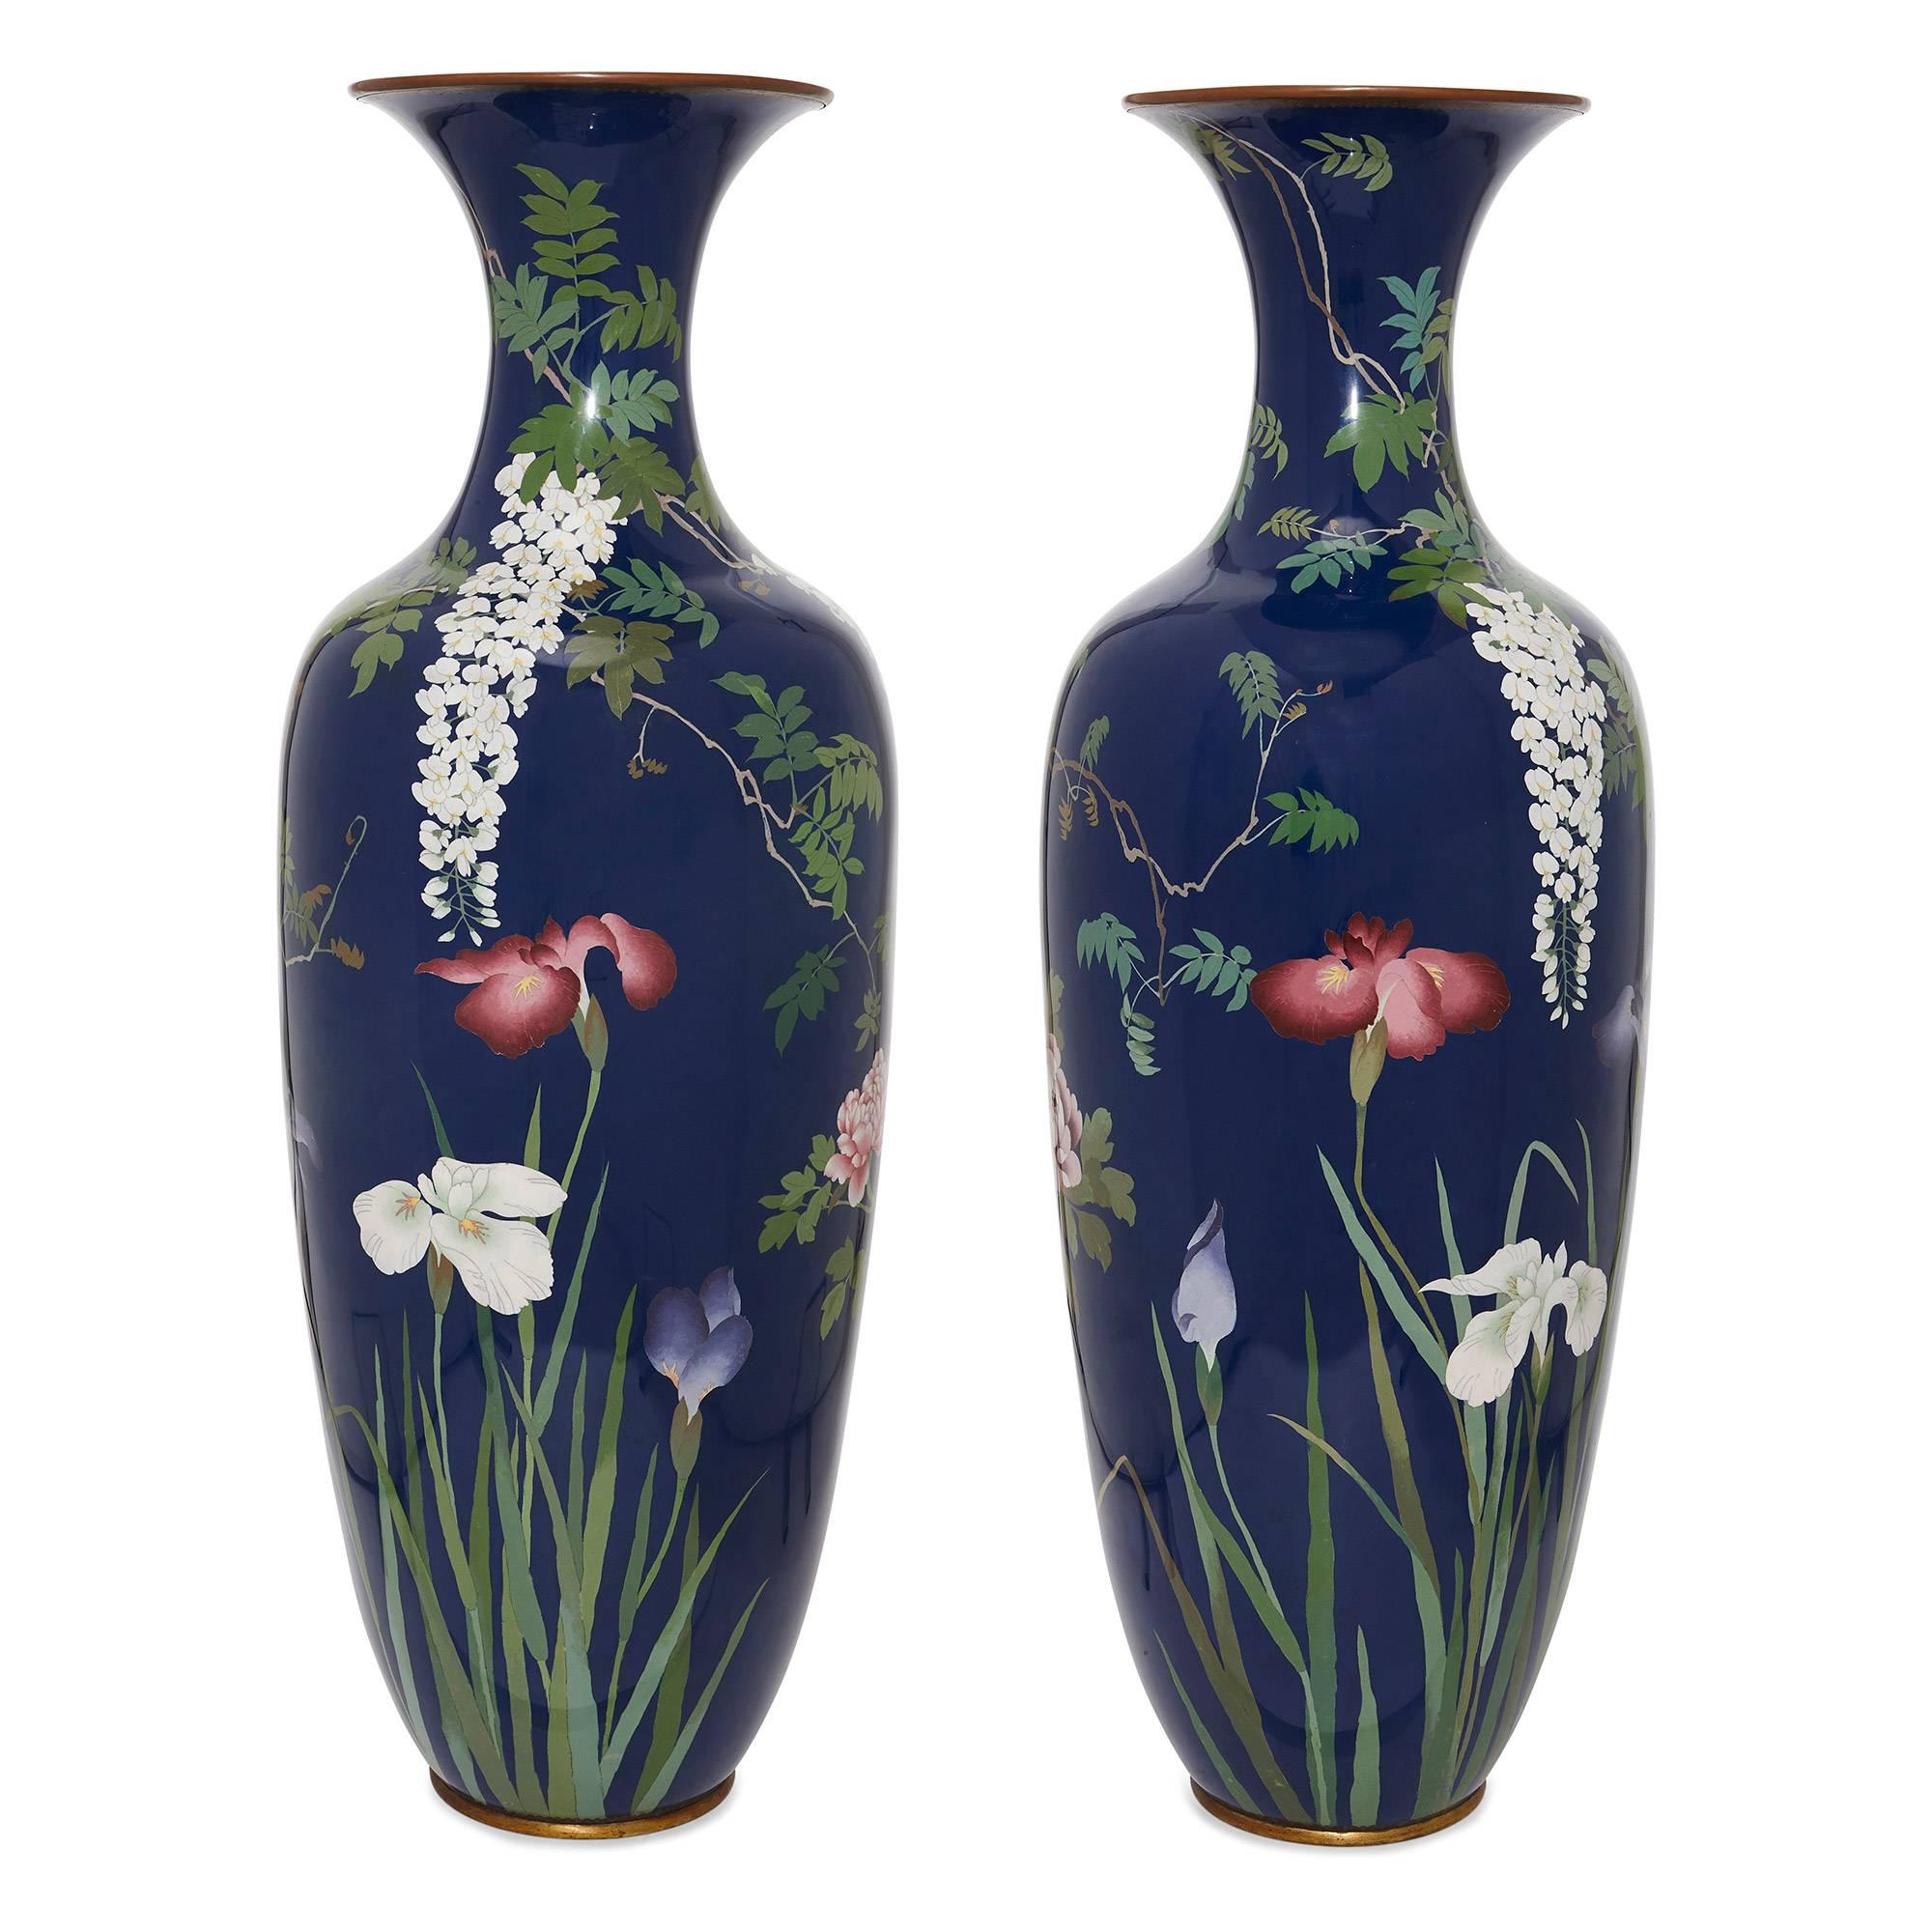 This pair of statuesque cloisonne enamel vases were made during the Japanese Meiji period in the late 19th century. The vases are ovoid in shape, and set with a blue ground. Their polished surfaces are adorned with foliate scenes of trees, birds and